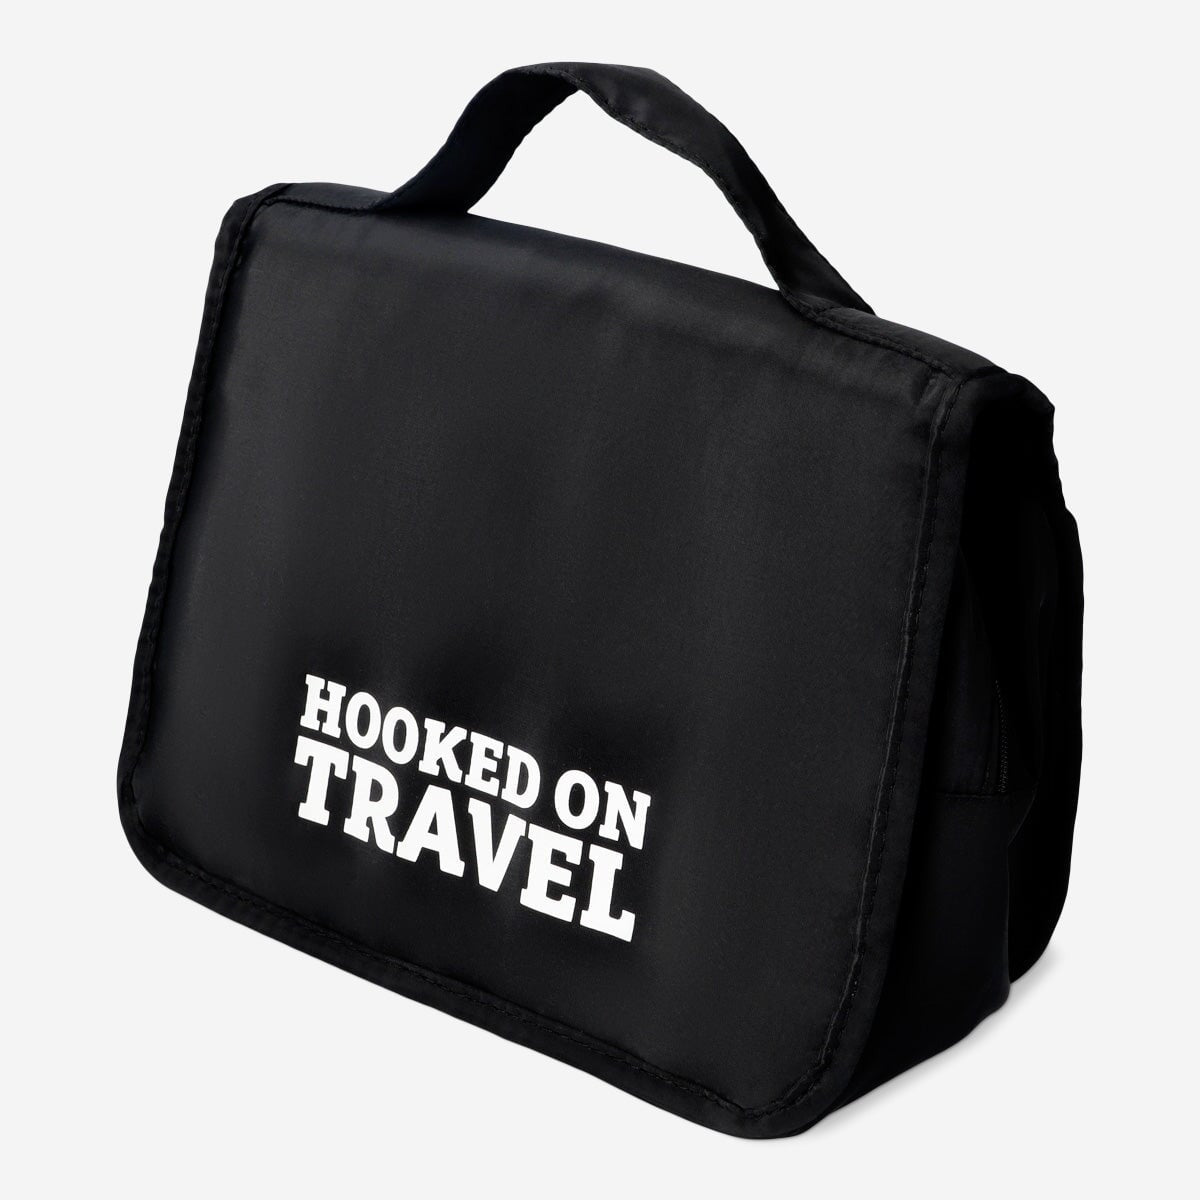 Toiletry bag. Can hang Personal care Flying Tiger Copenhagen 